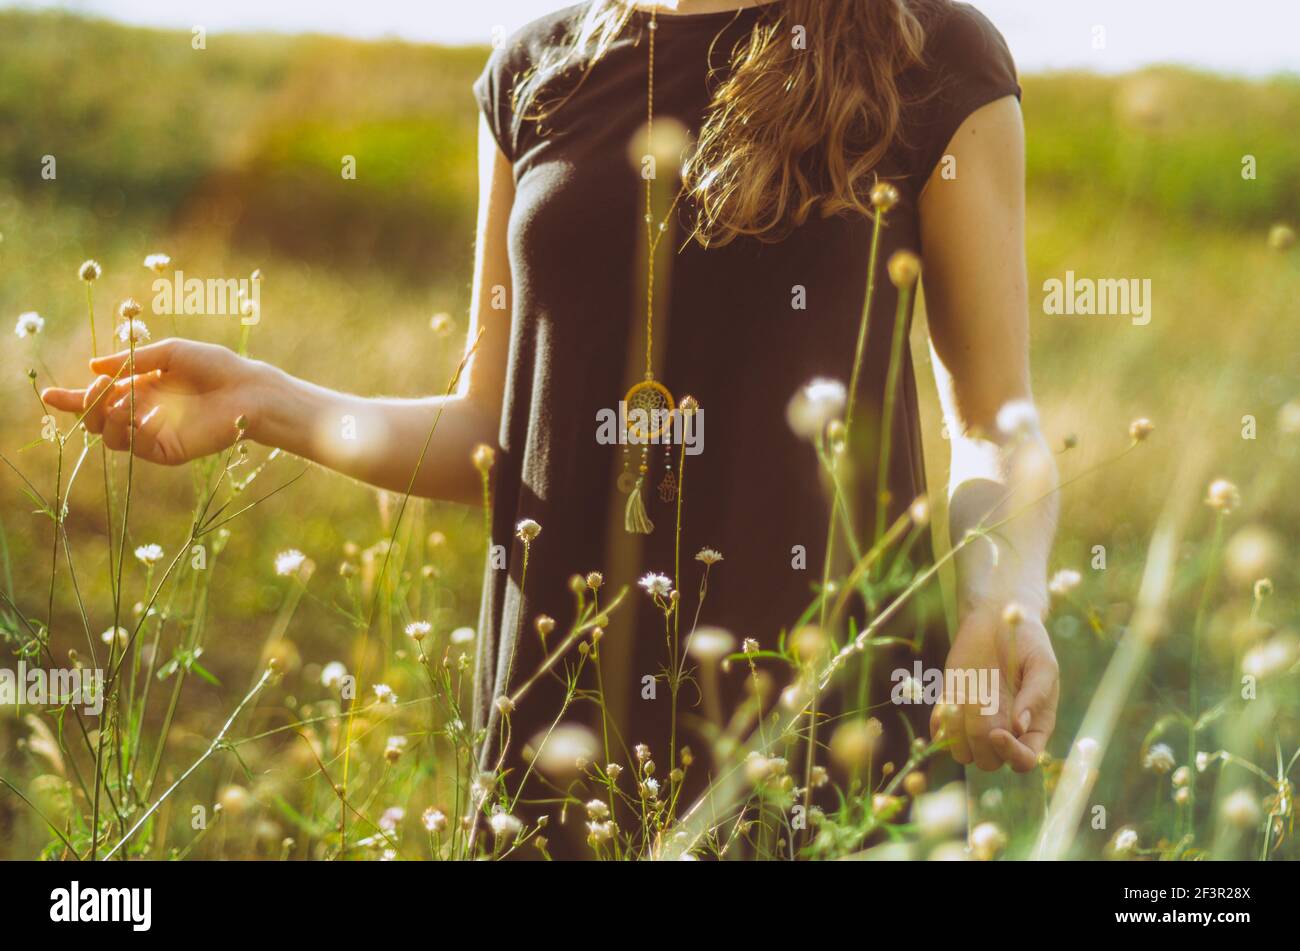 Mid section portrait boho style dress young woman walking in the grass and wildflowers connecting with nature. Concept: spirituality, zen, balance Stock Photo